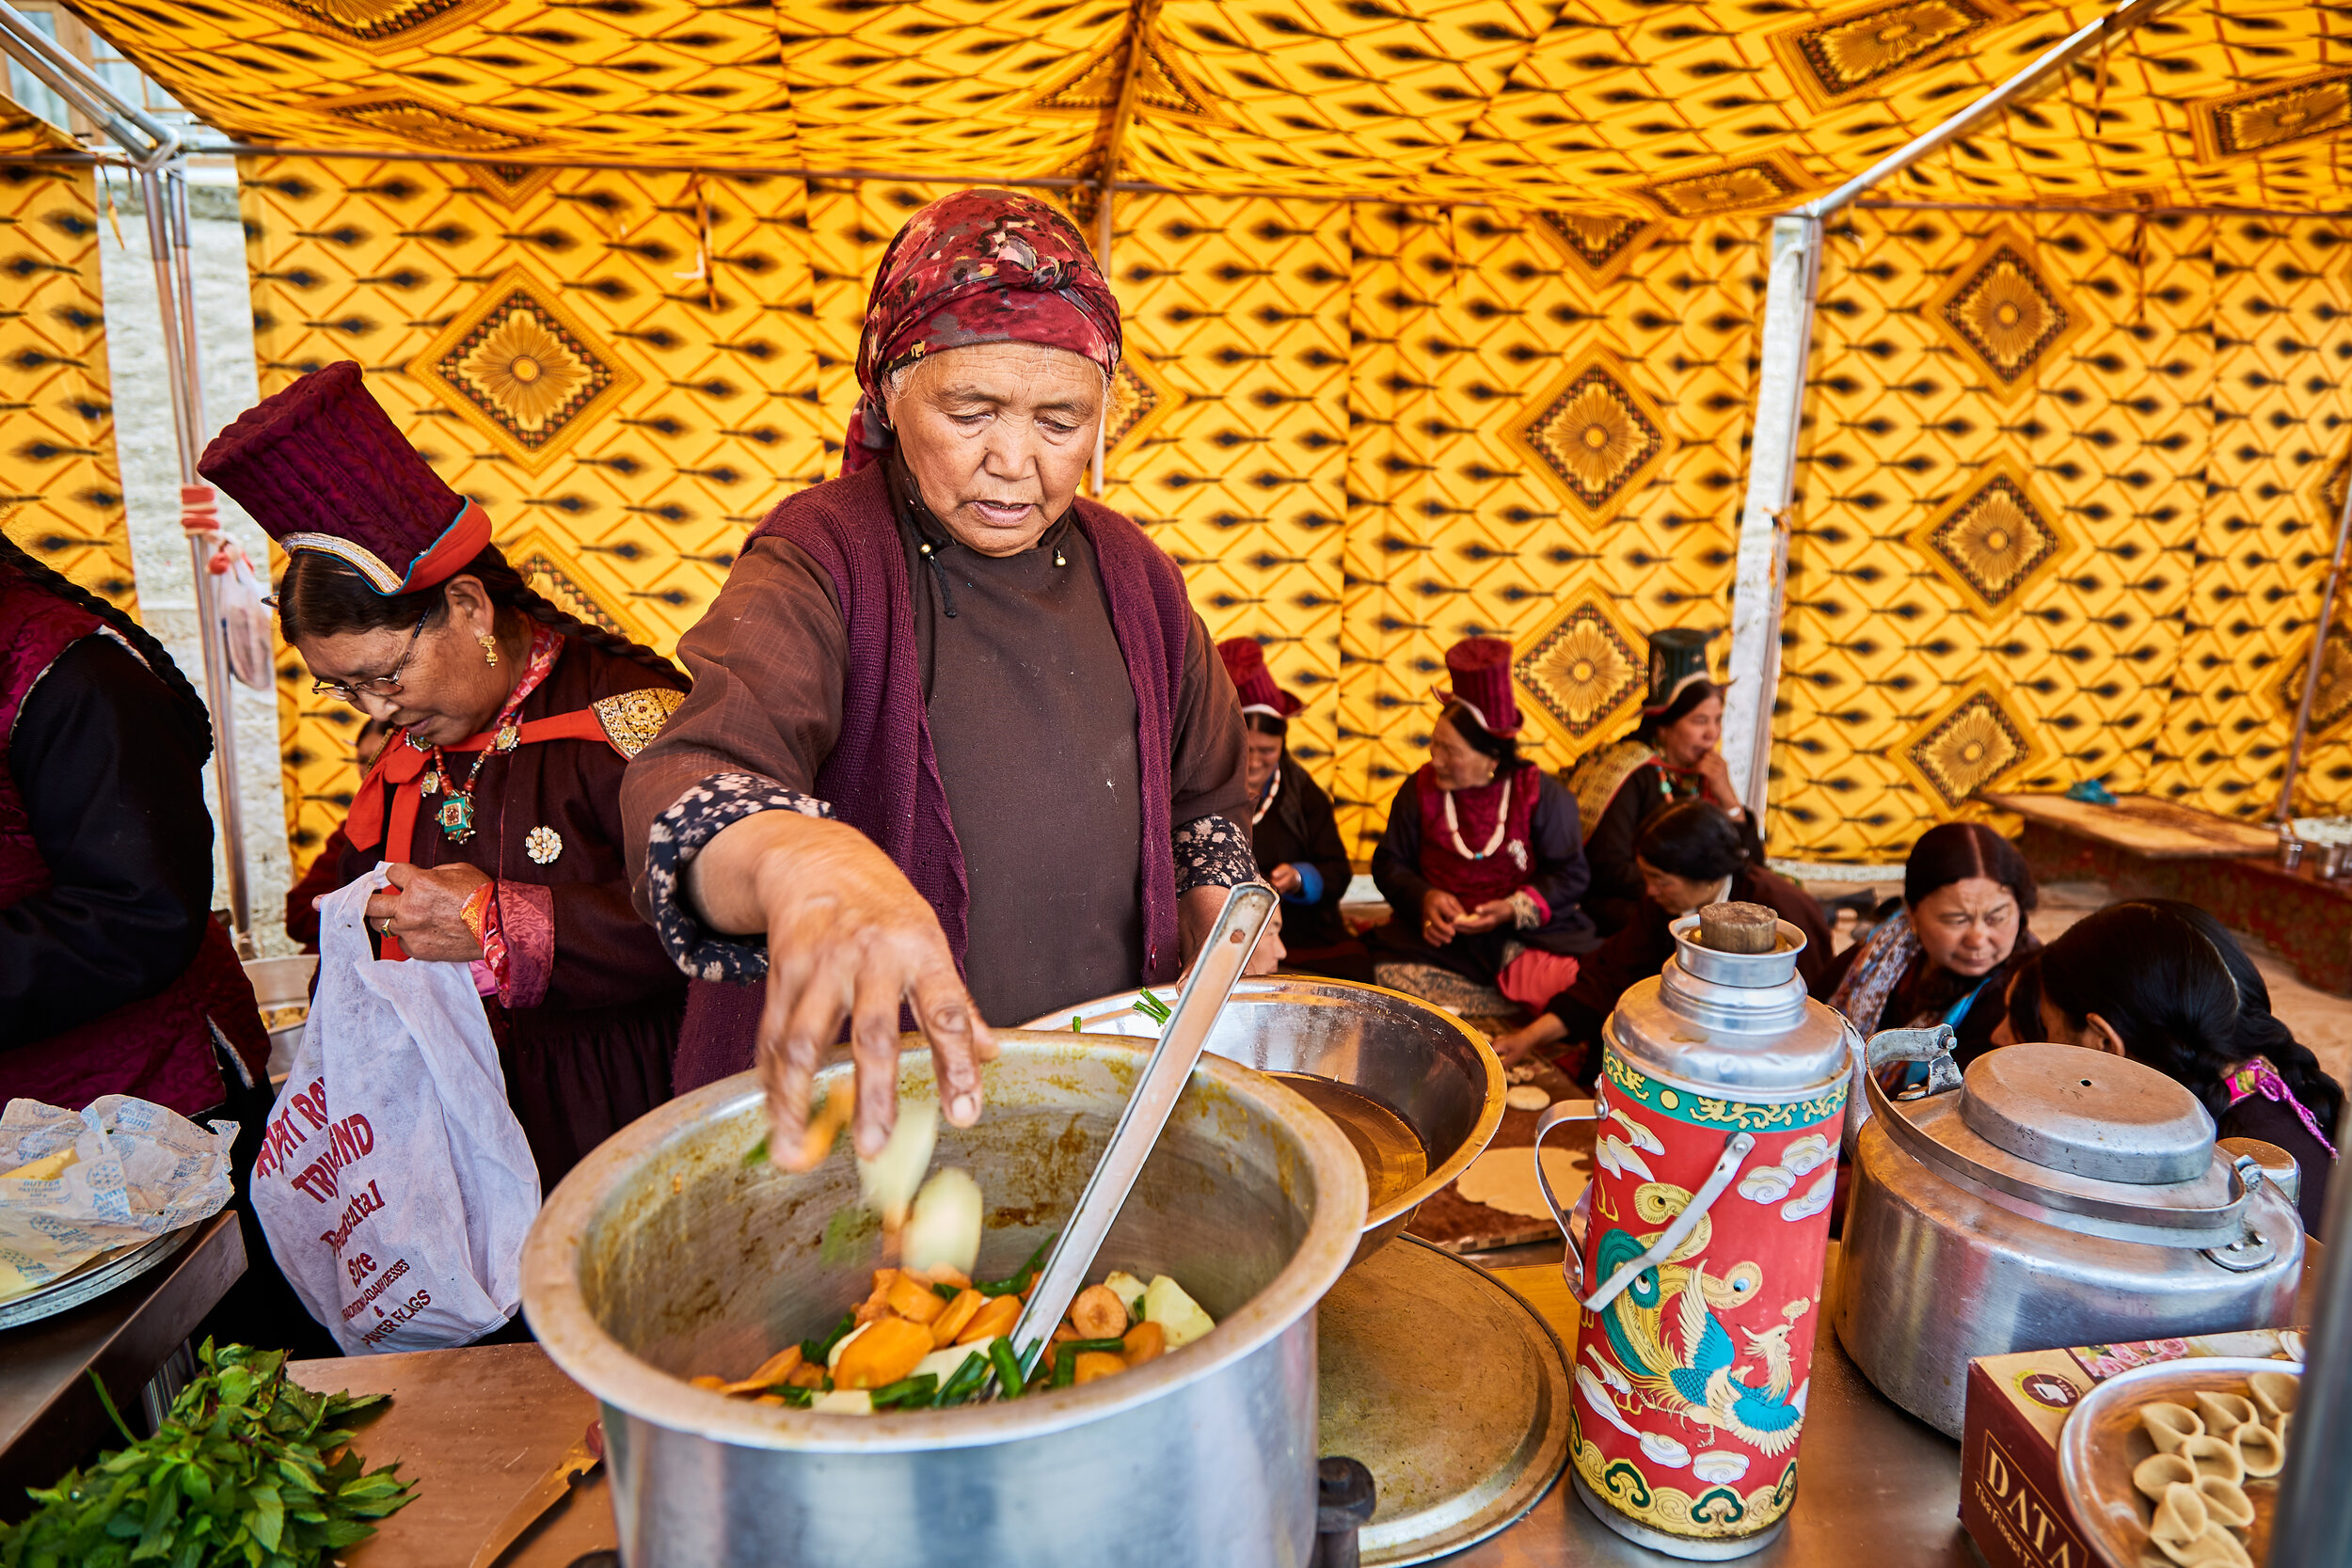  With the tourism booming the local council has organised several events around the year. Group of women making traditional food at such an event. 